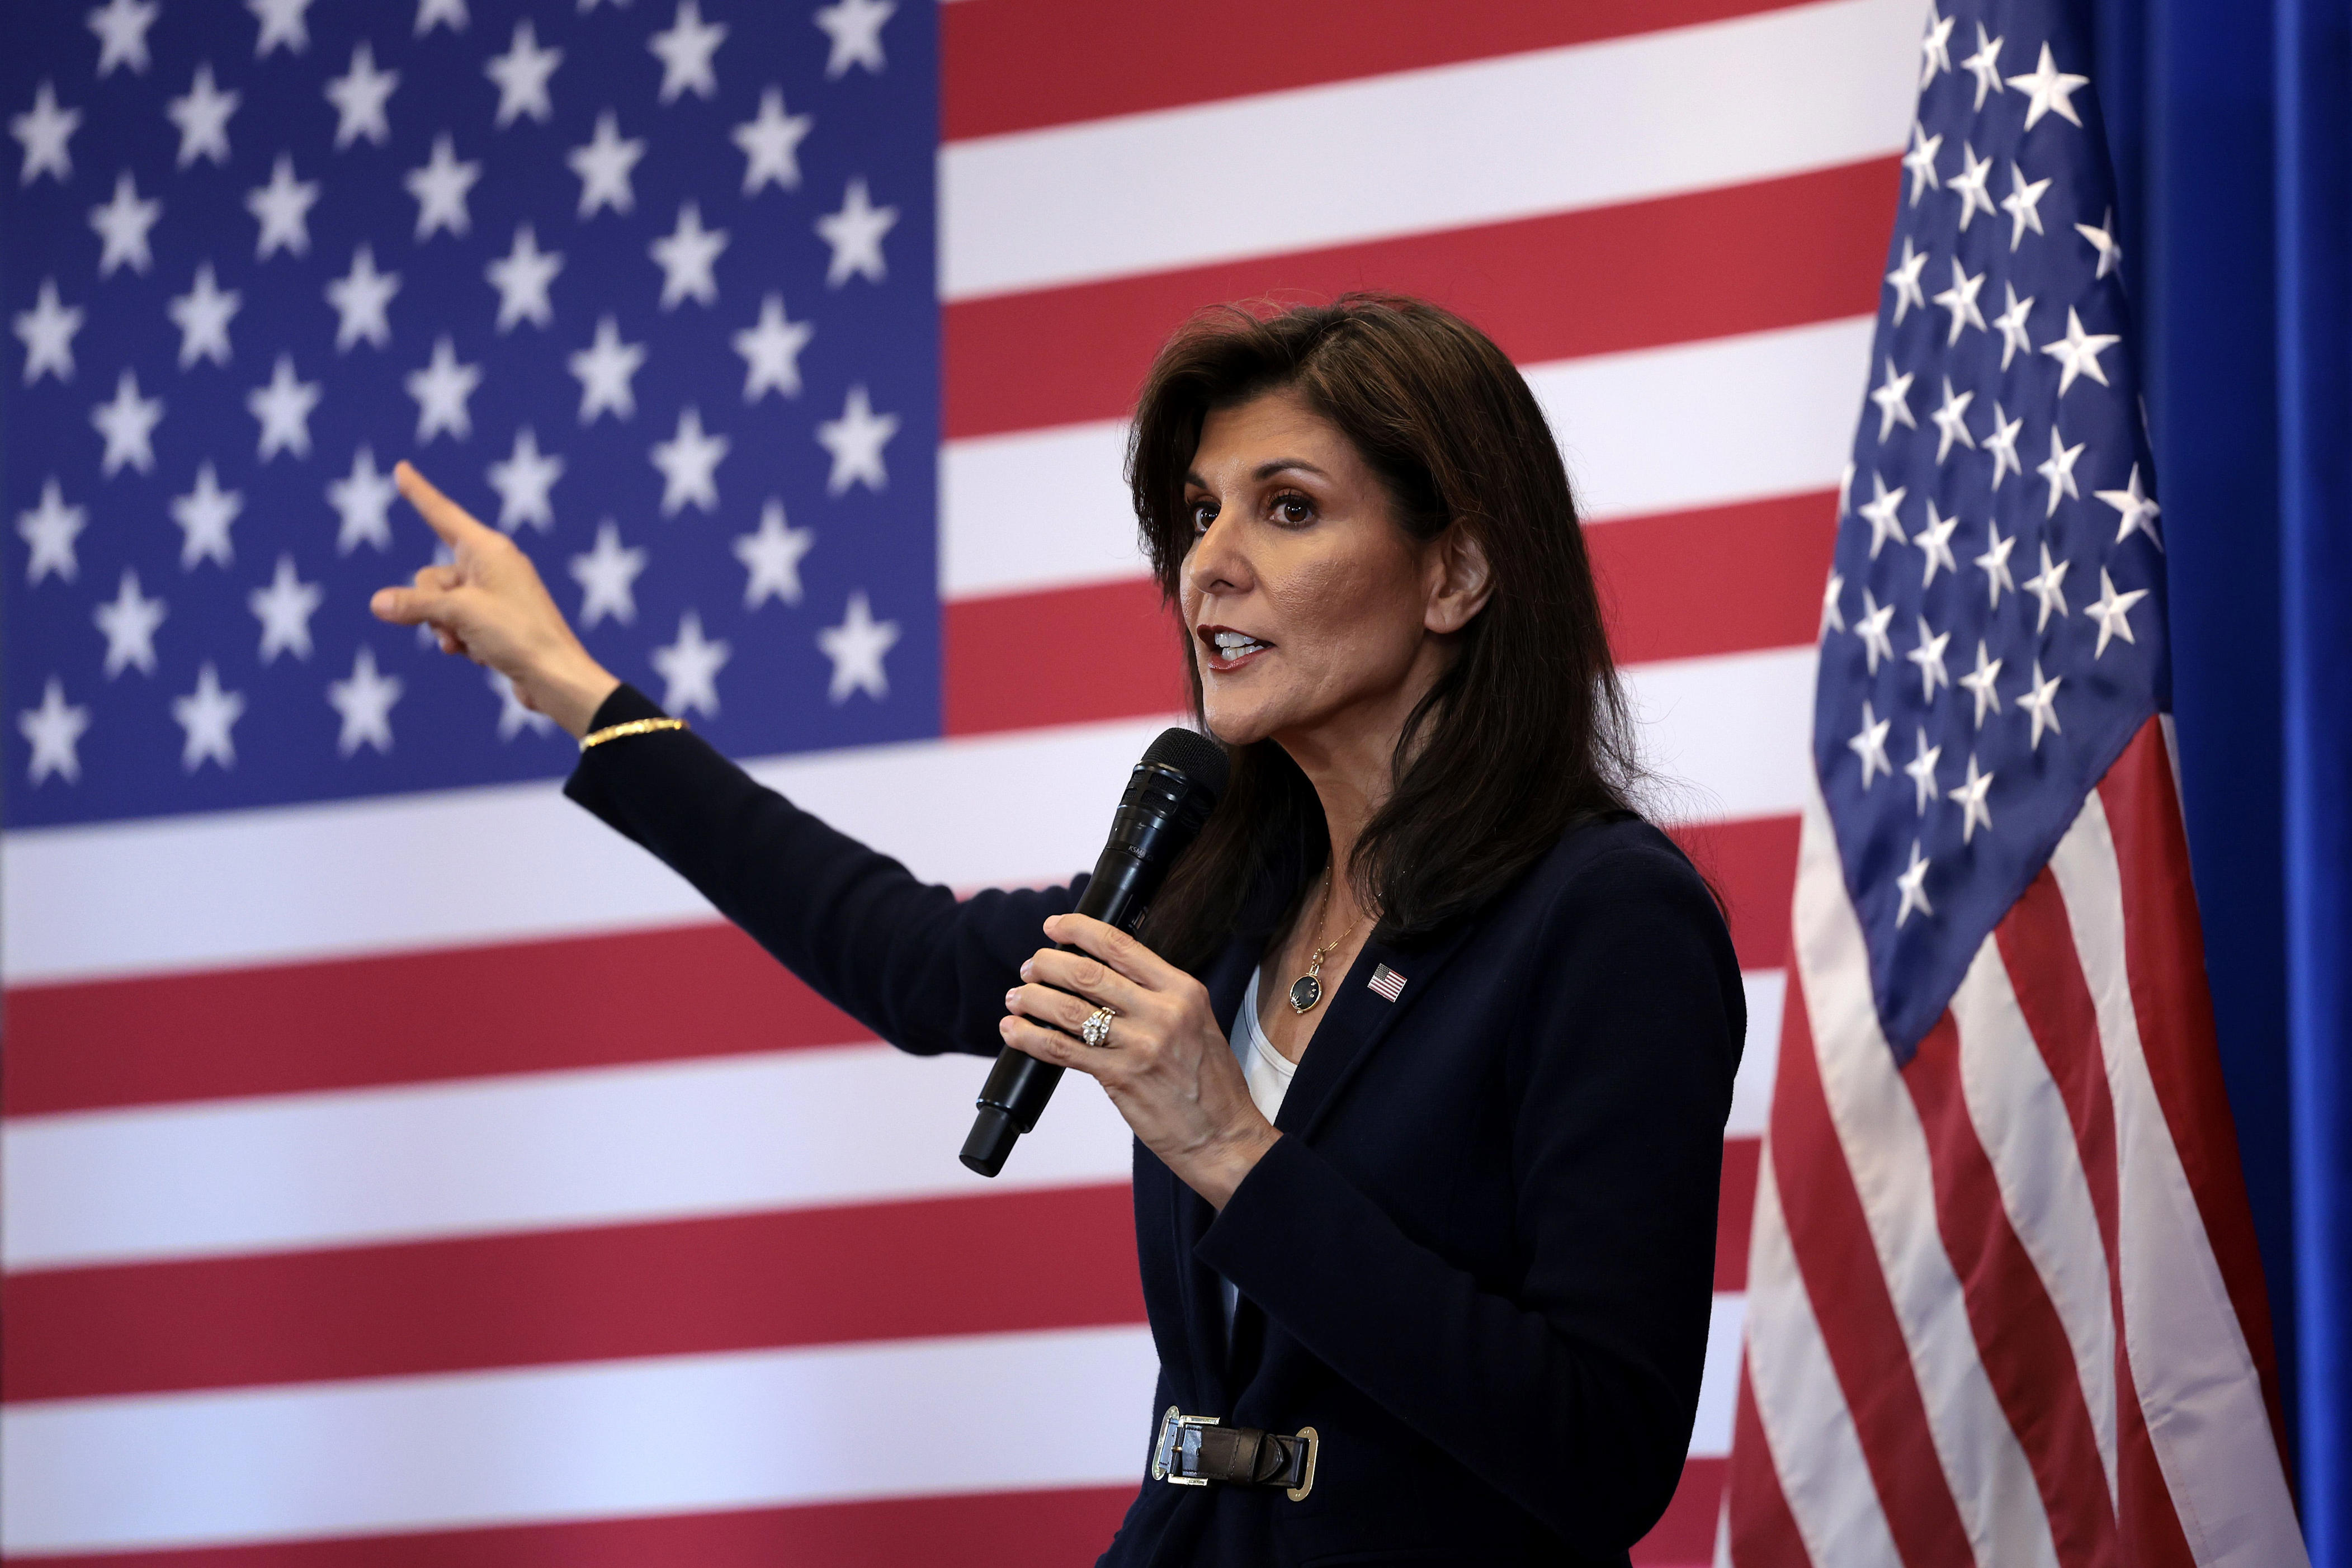 nikki haley says congress is 'lying to the american people' as they fail to pass border, aid deals